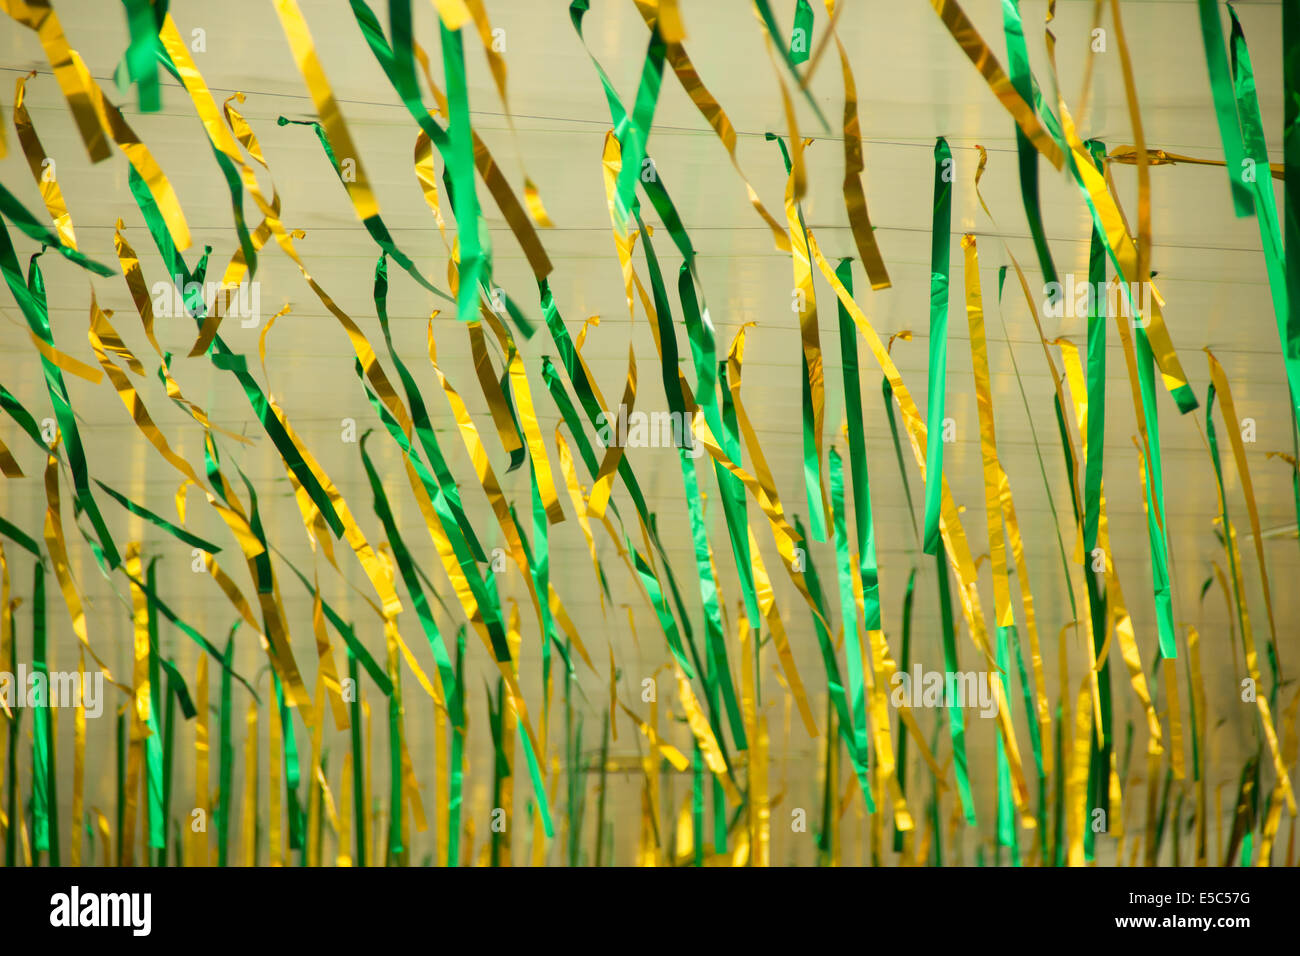 Metallic Ribbons with the main colors of the Brazilian Flag. Stock Photo